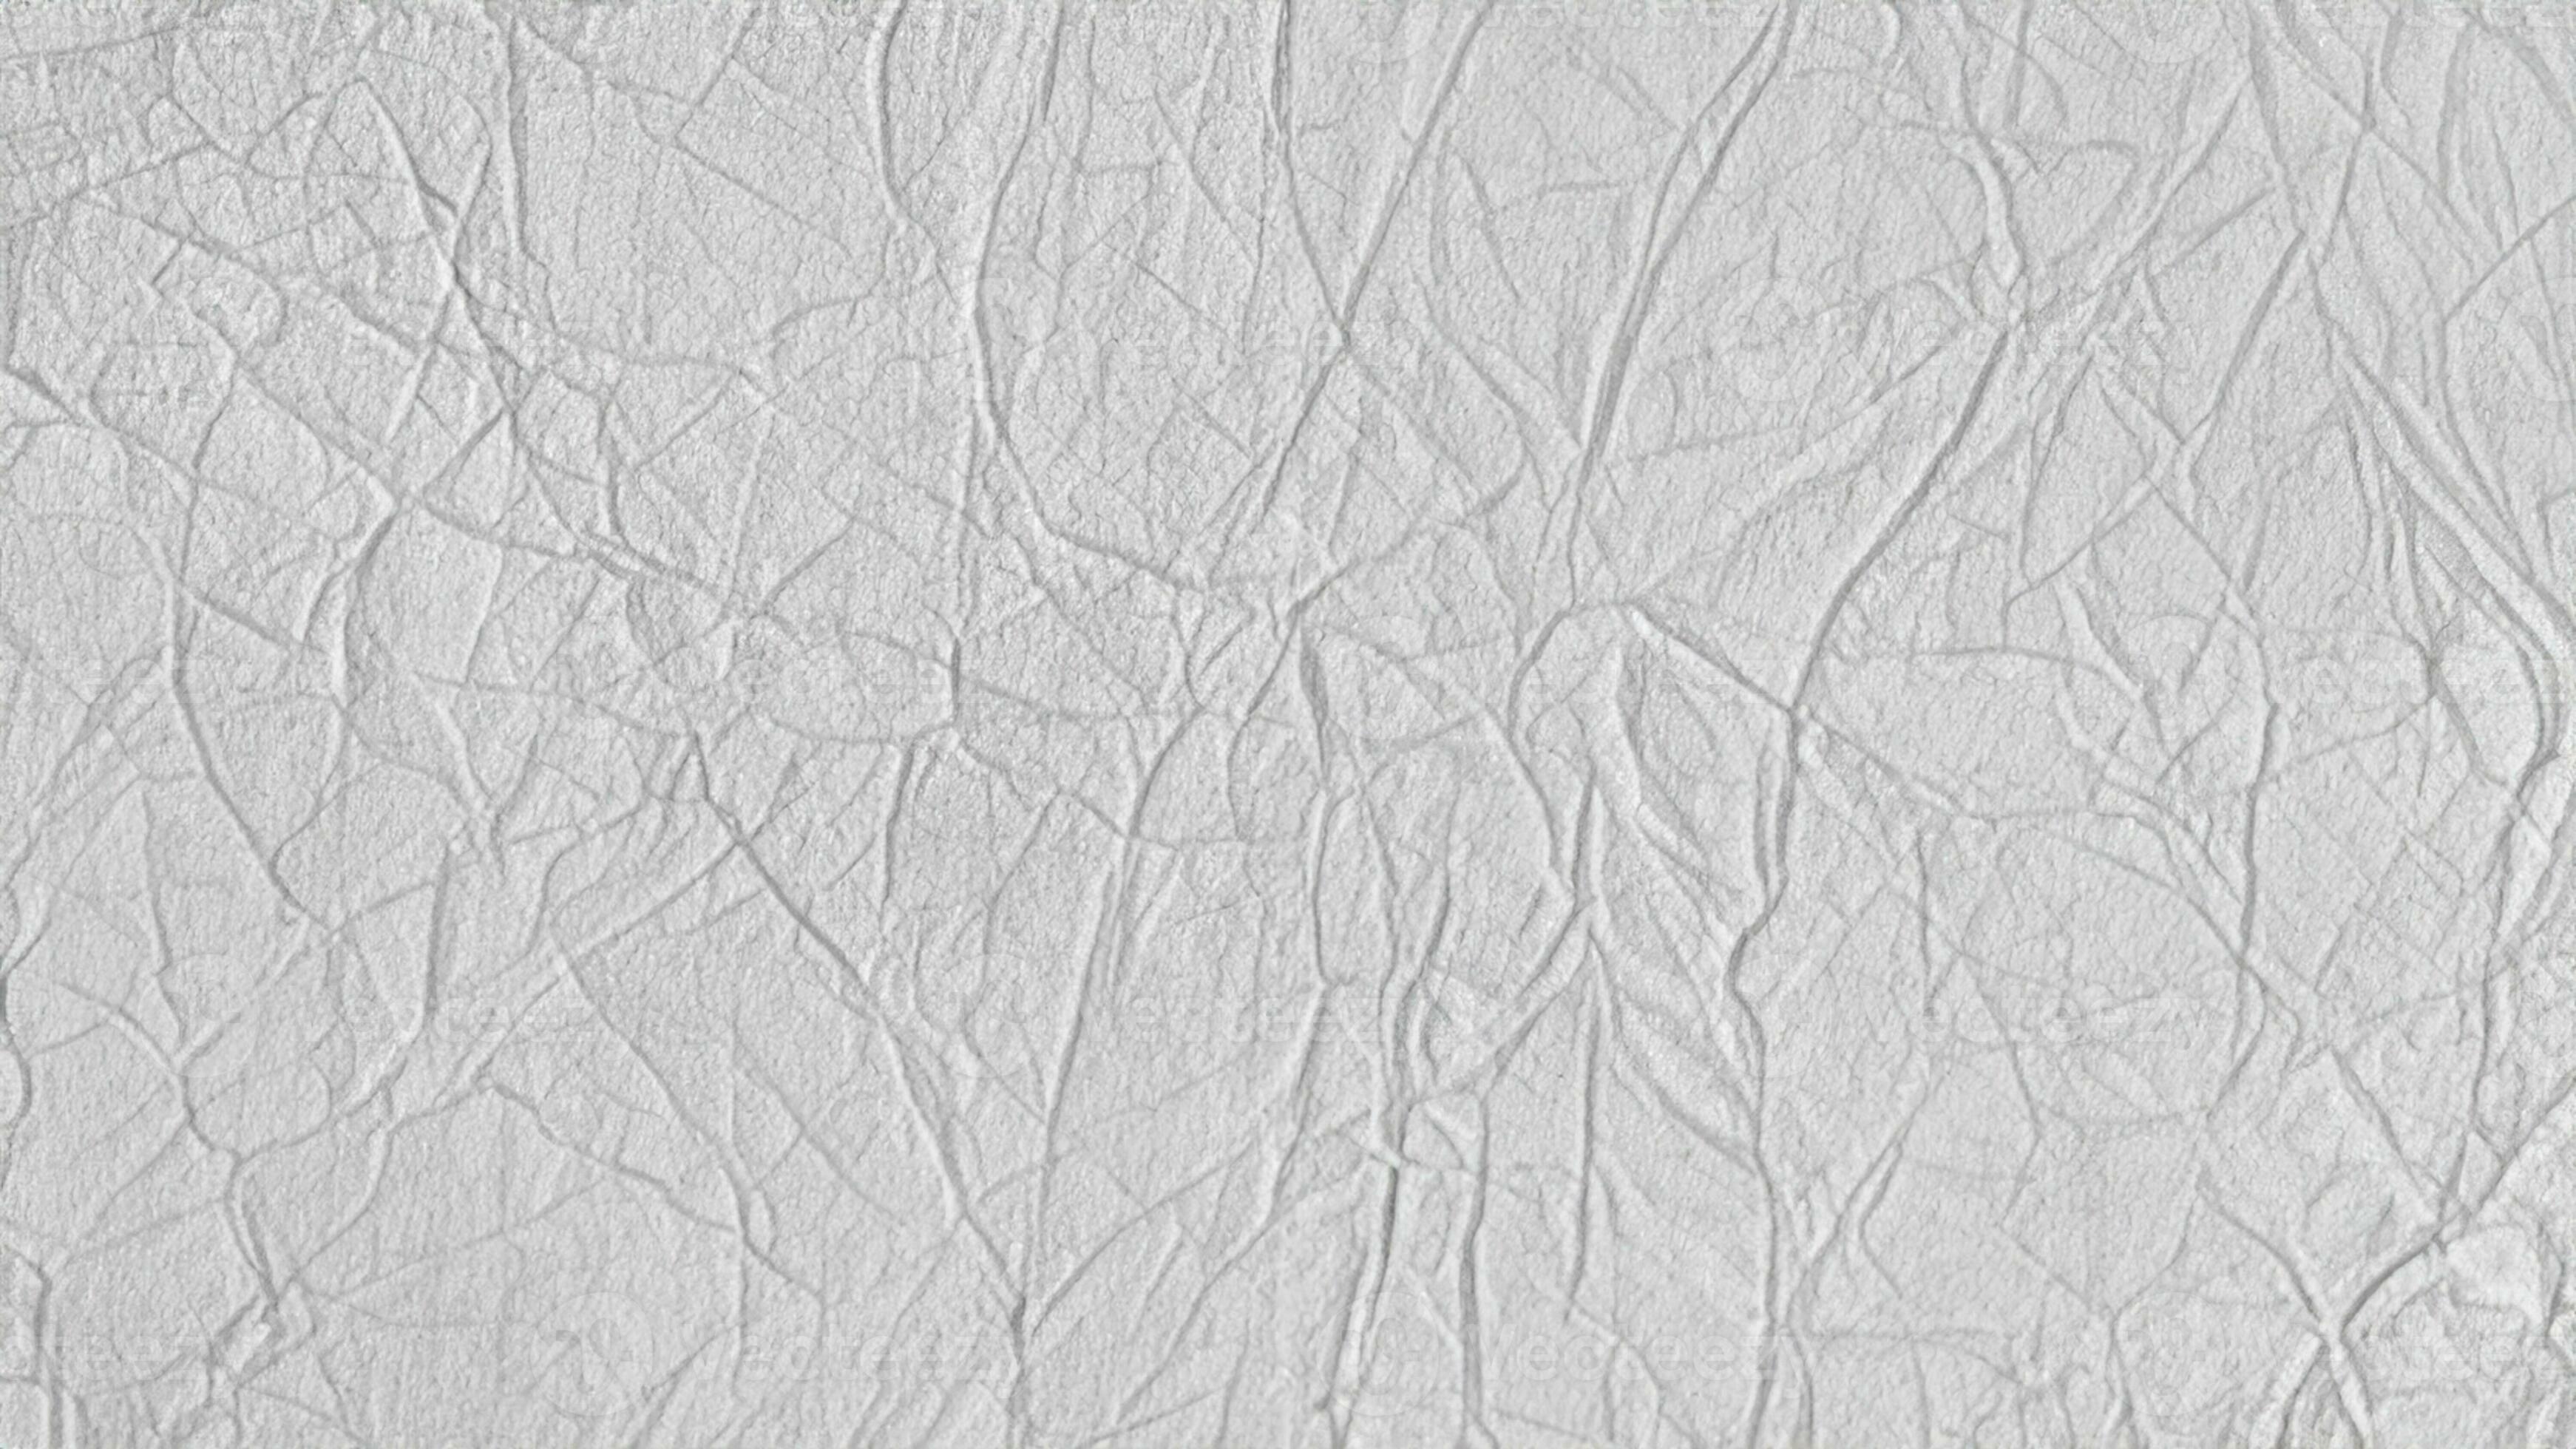 https://static.vecteezy.com/system/resources/previews/035/957/663/large_2x/white-leather-texture-seamless-high-resolution-texture-of-folds-black-calf-leather-photo.jpg